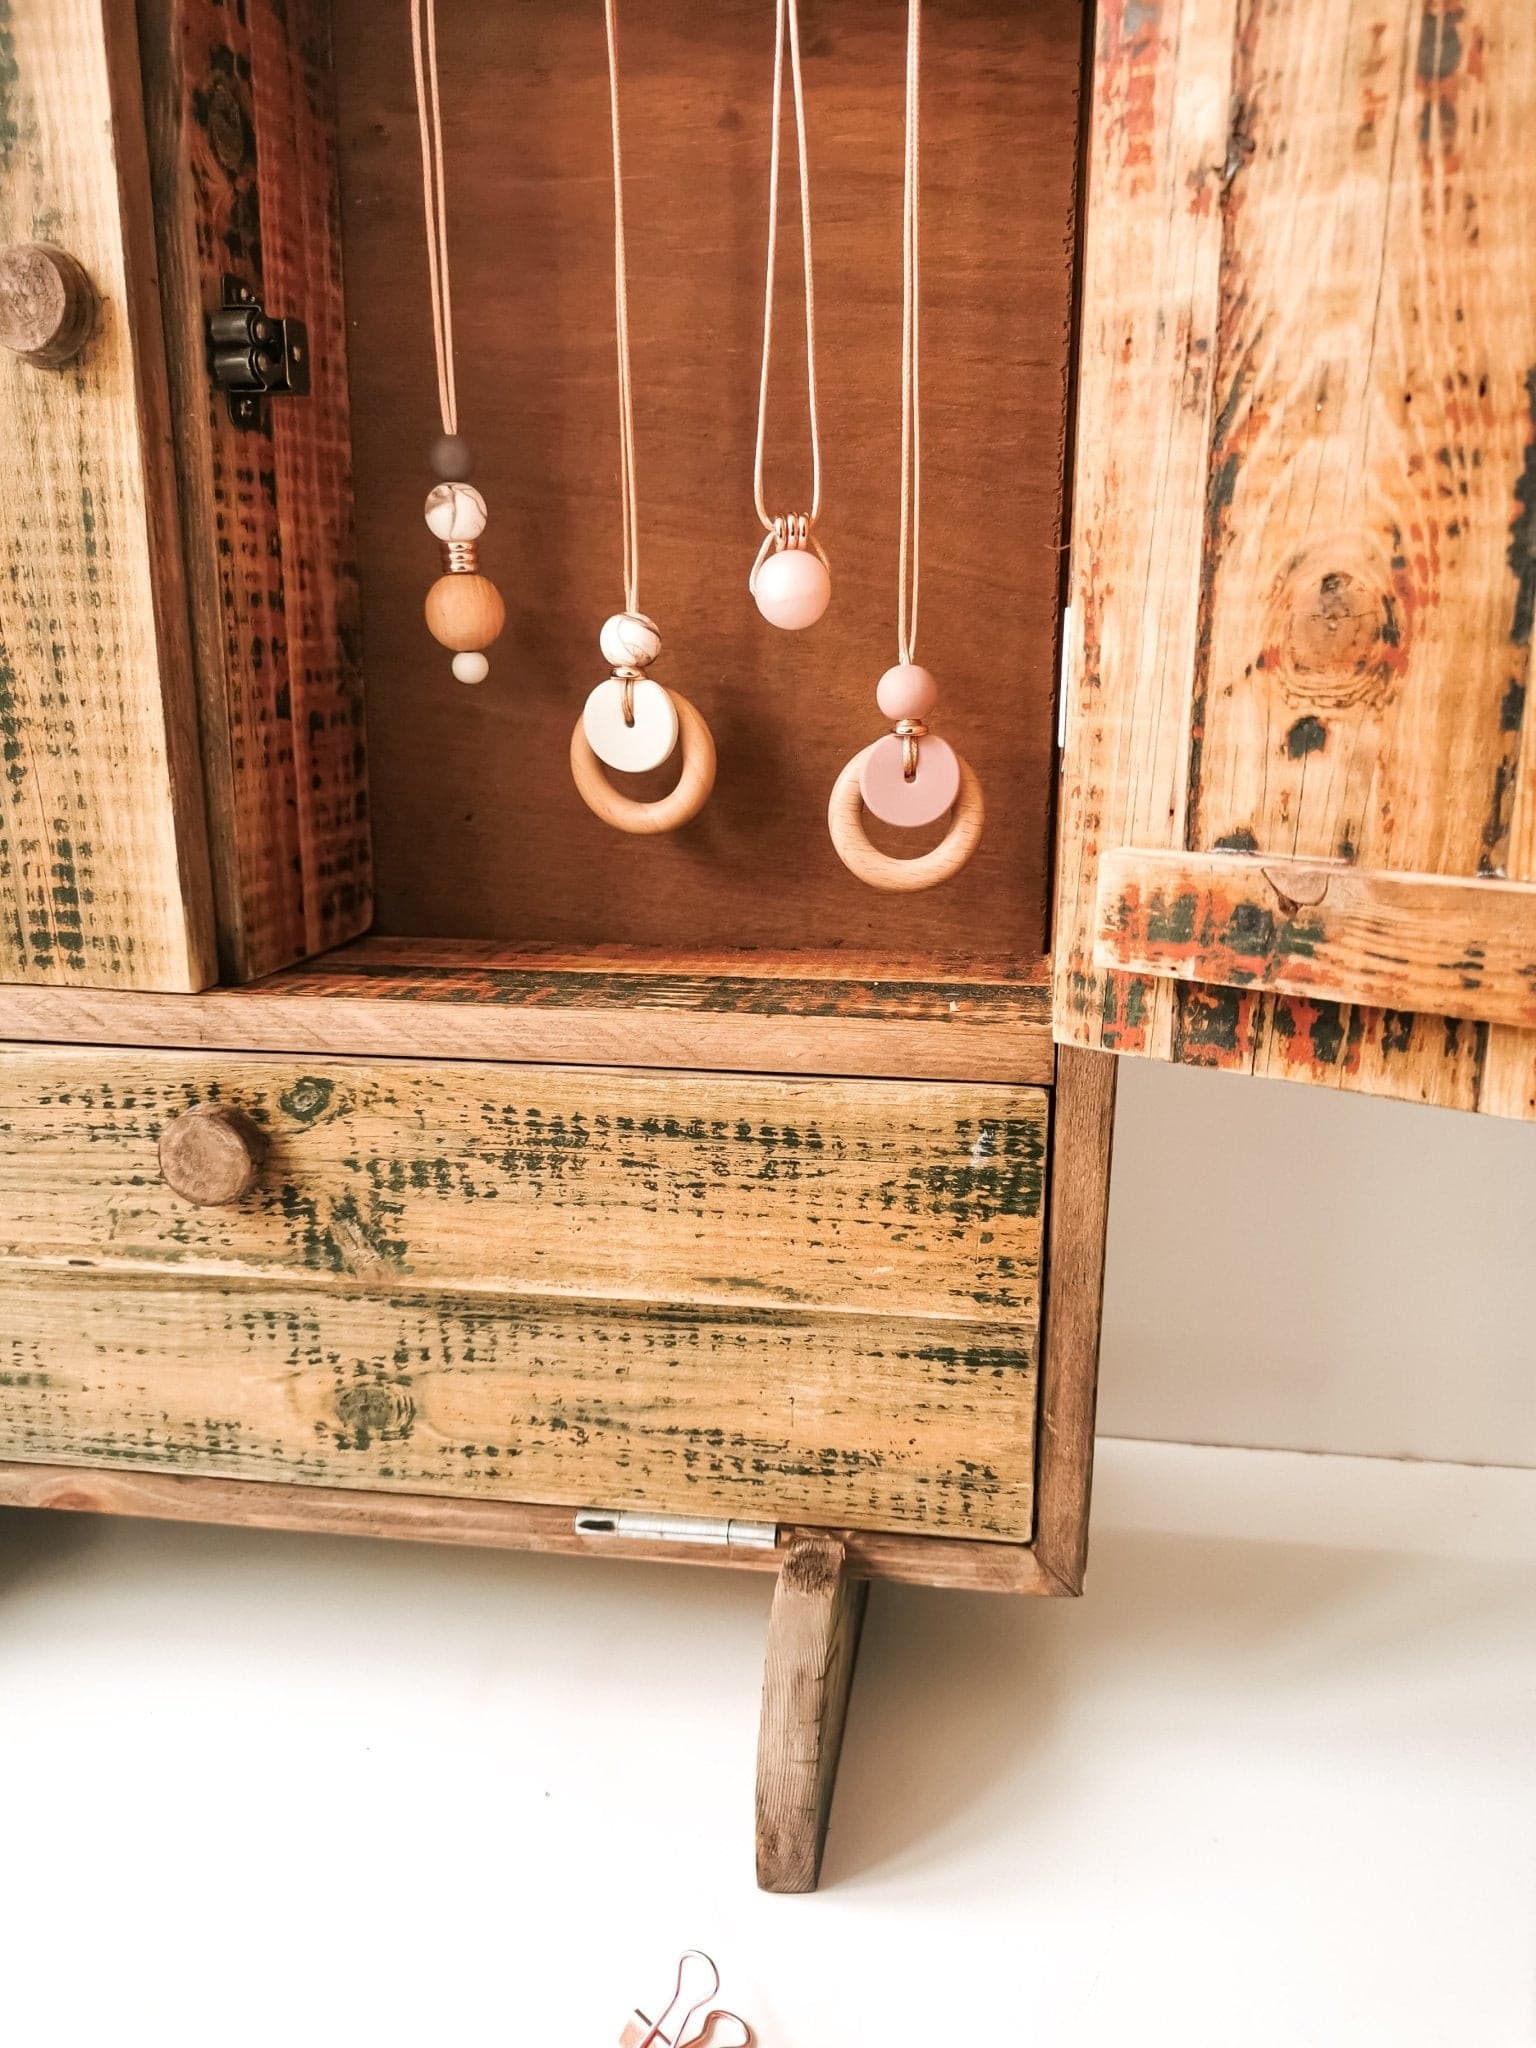 Blossy breastfeeding necklaces hung in jewellery box.